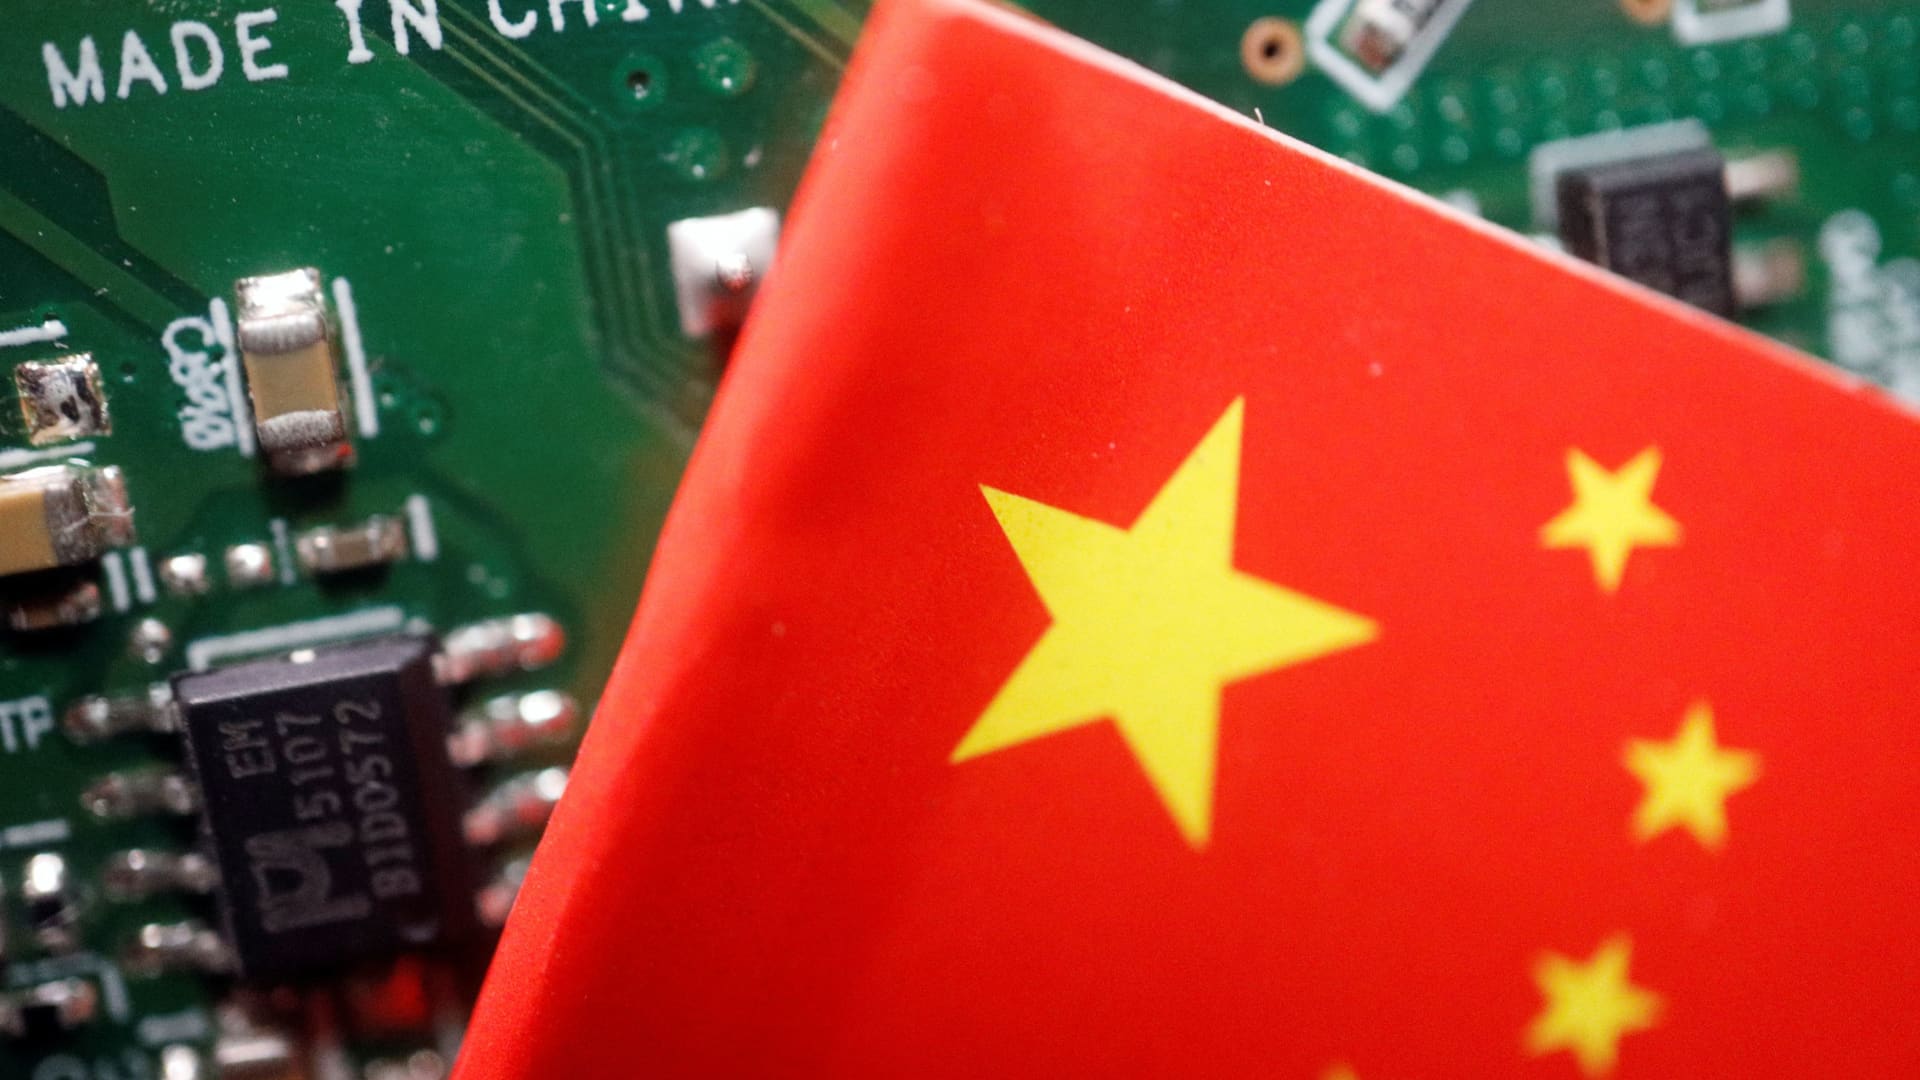 China's biggest chipmaker SMIC seems to have been manufacturing advanced chips in the last few months — defying U.S. sanctions designed to slow